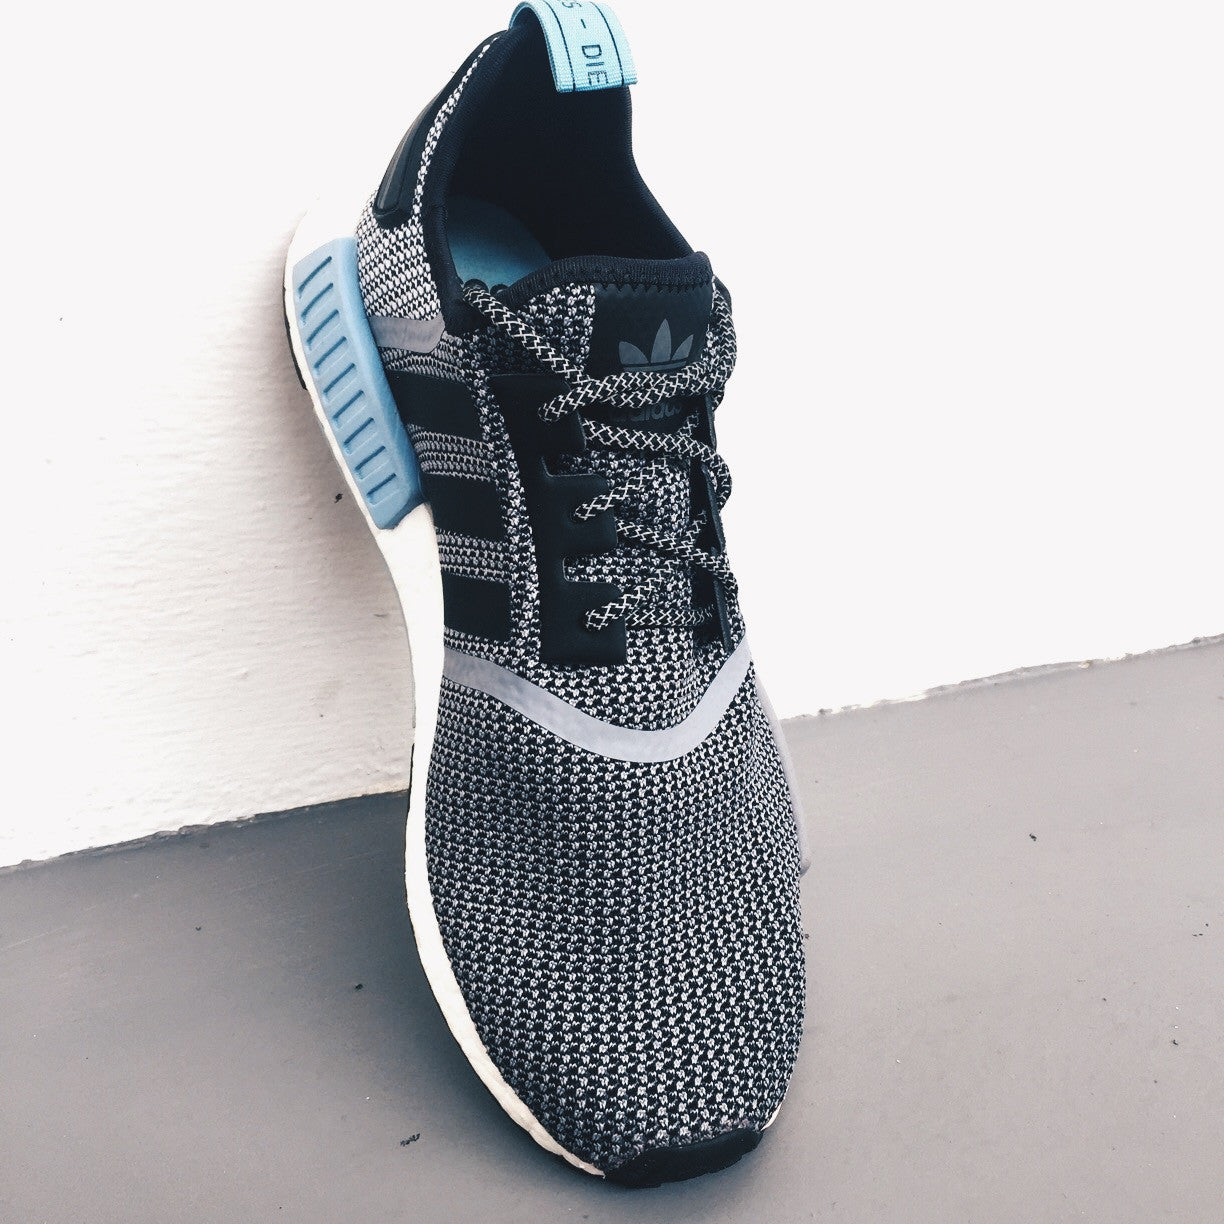 How To Lace Sneakers / Swap Your Shoe Laces : ADIDAS NMD R1 Circa - Slickies